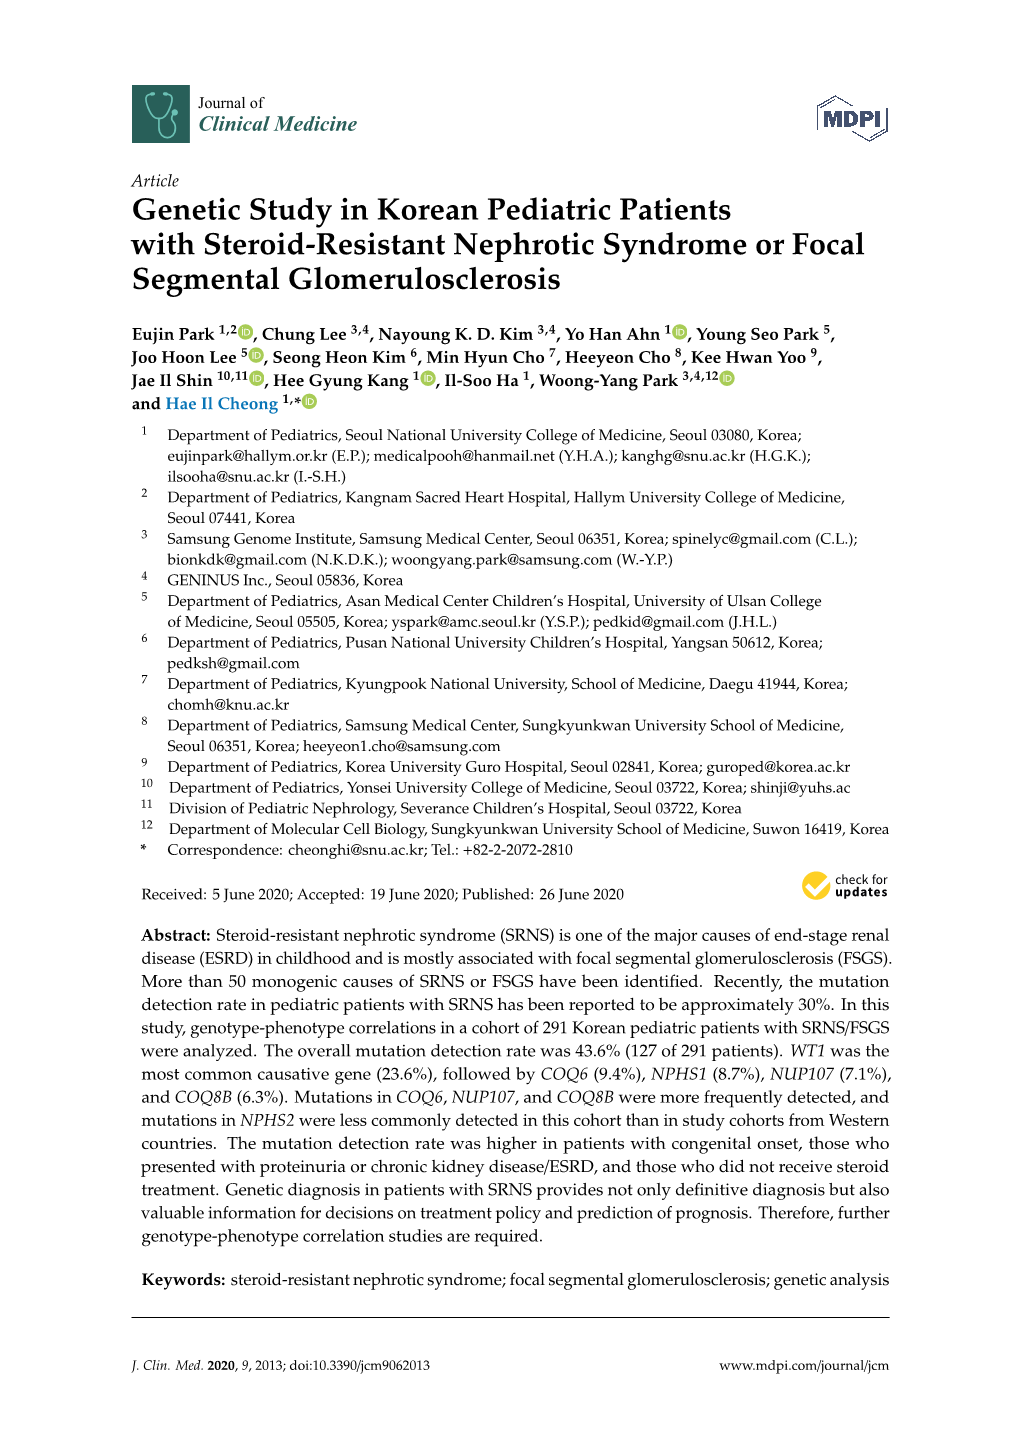 Genetic Study in Korean Pediatric Patients with Steroid-Resistant Nephrotic Syndrome Or Focal Segmental Glomerulosclerosis